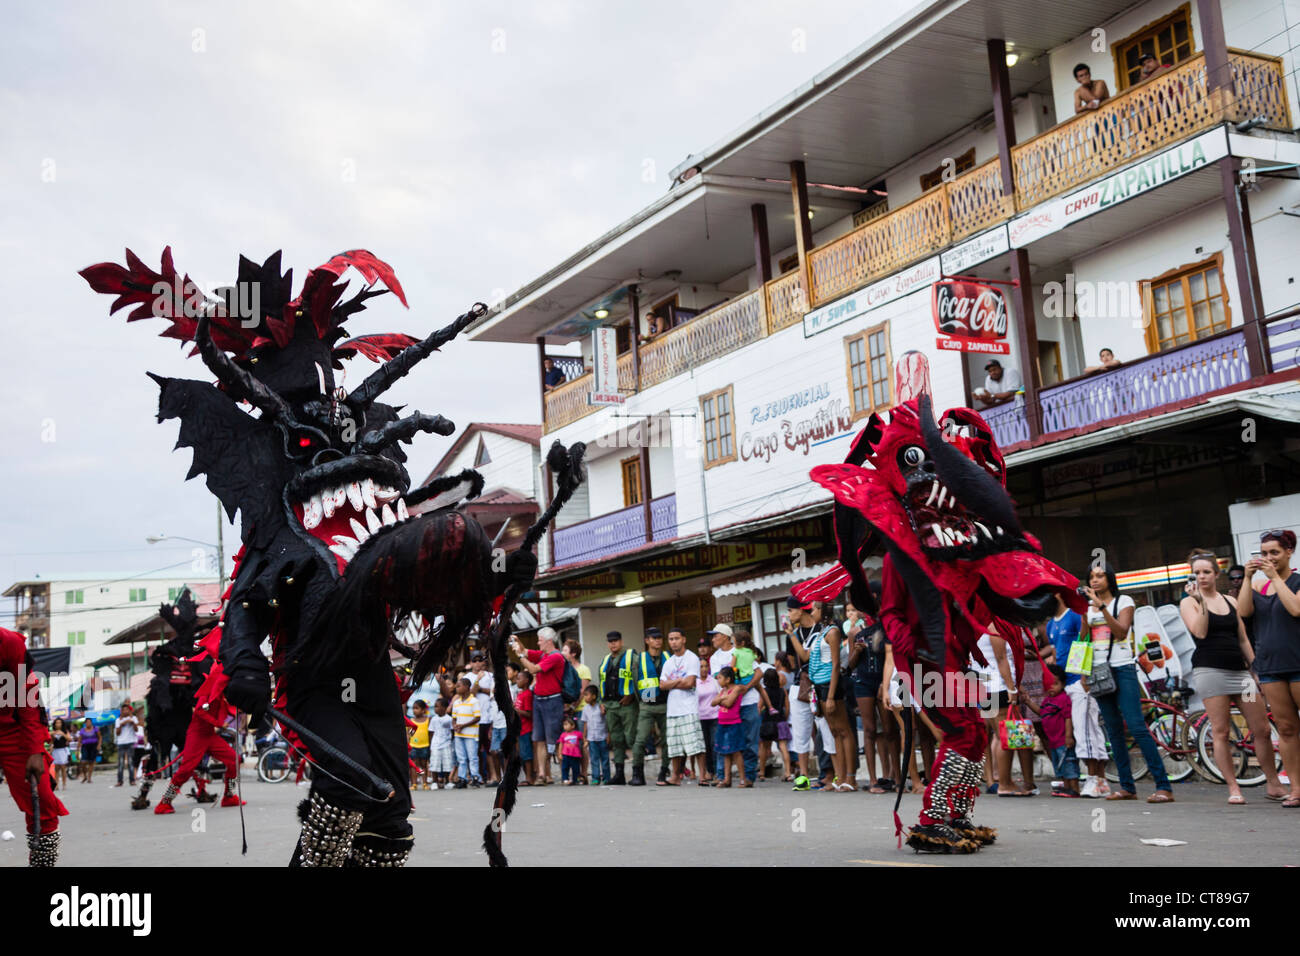 'Whipping Devils' patrol the streets during the Panamanian Carnival celebration on Isla Colon, Bocas del Toro, Panama. Stock Photo